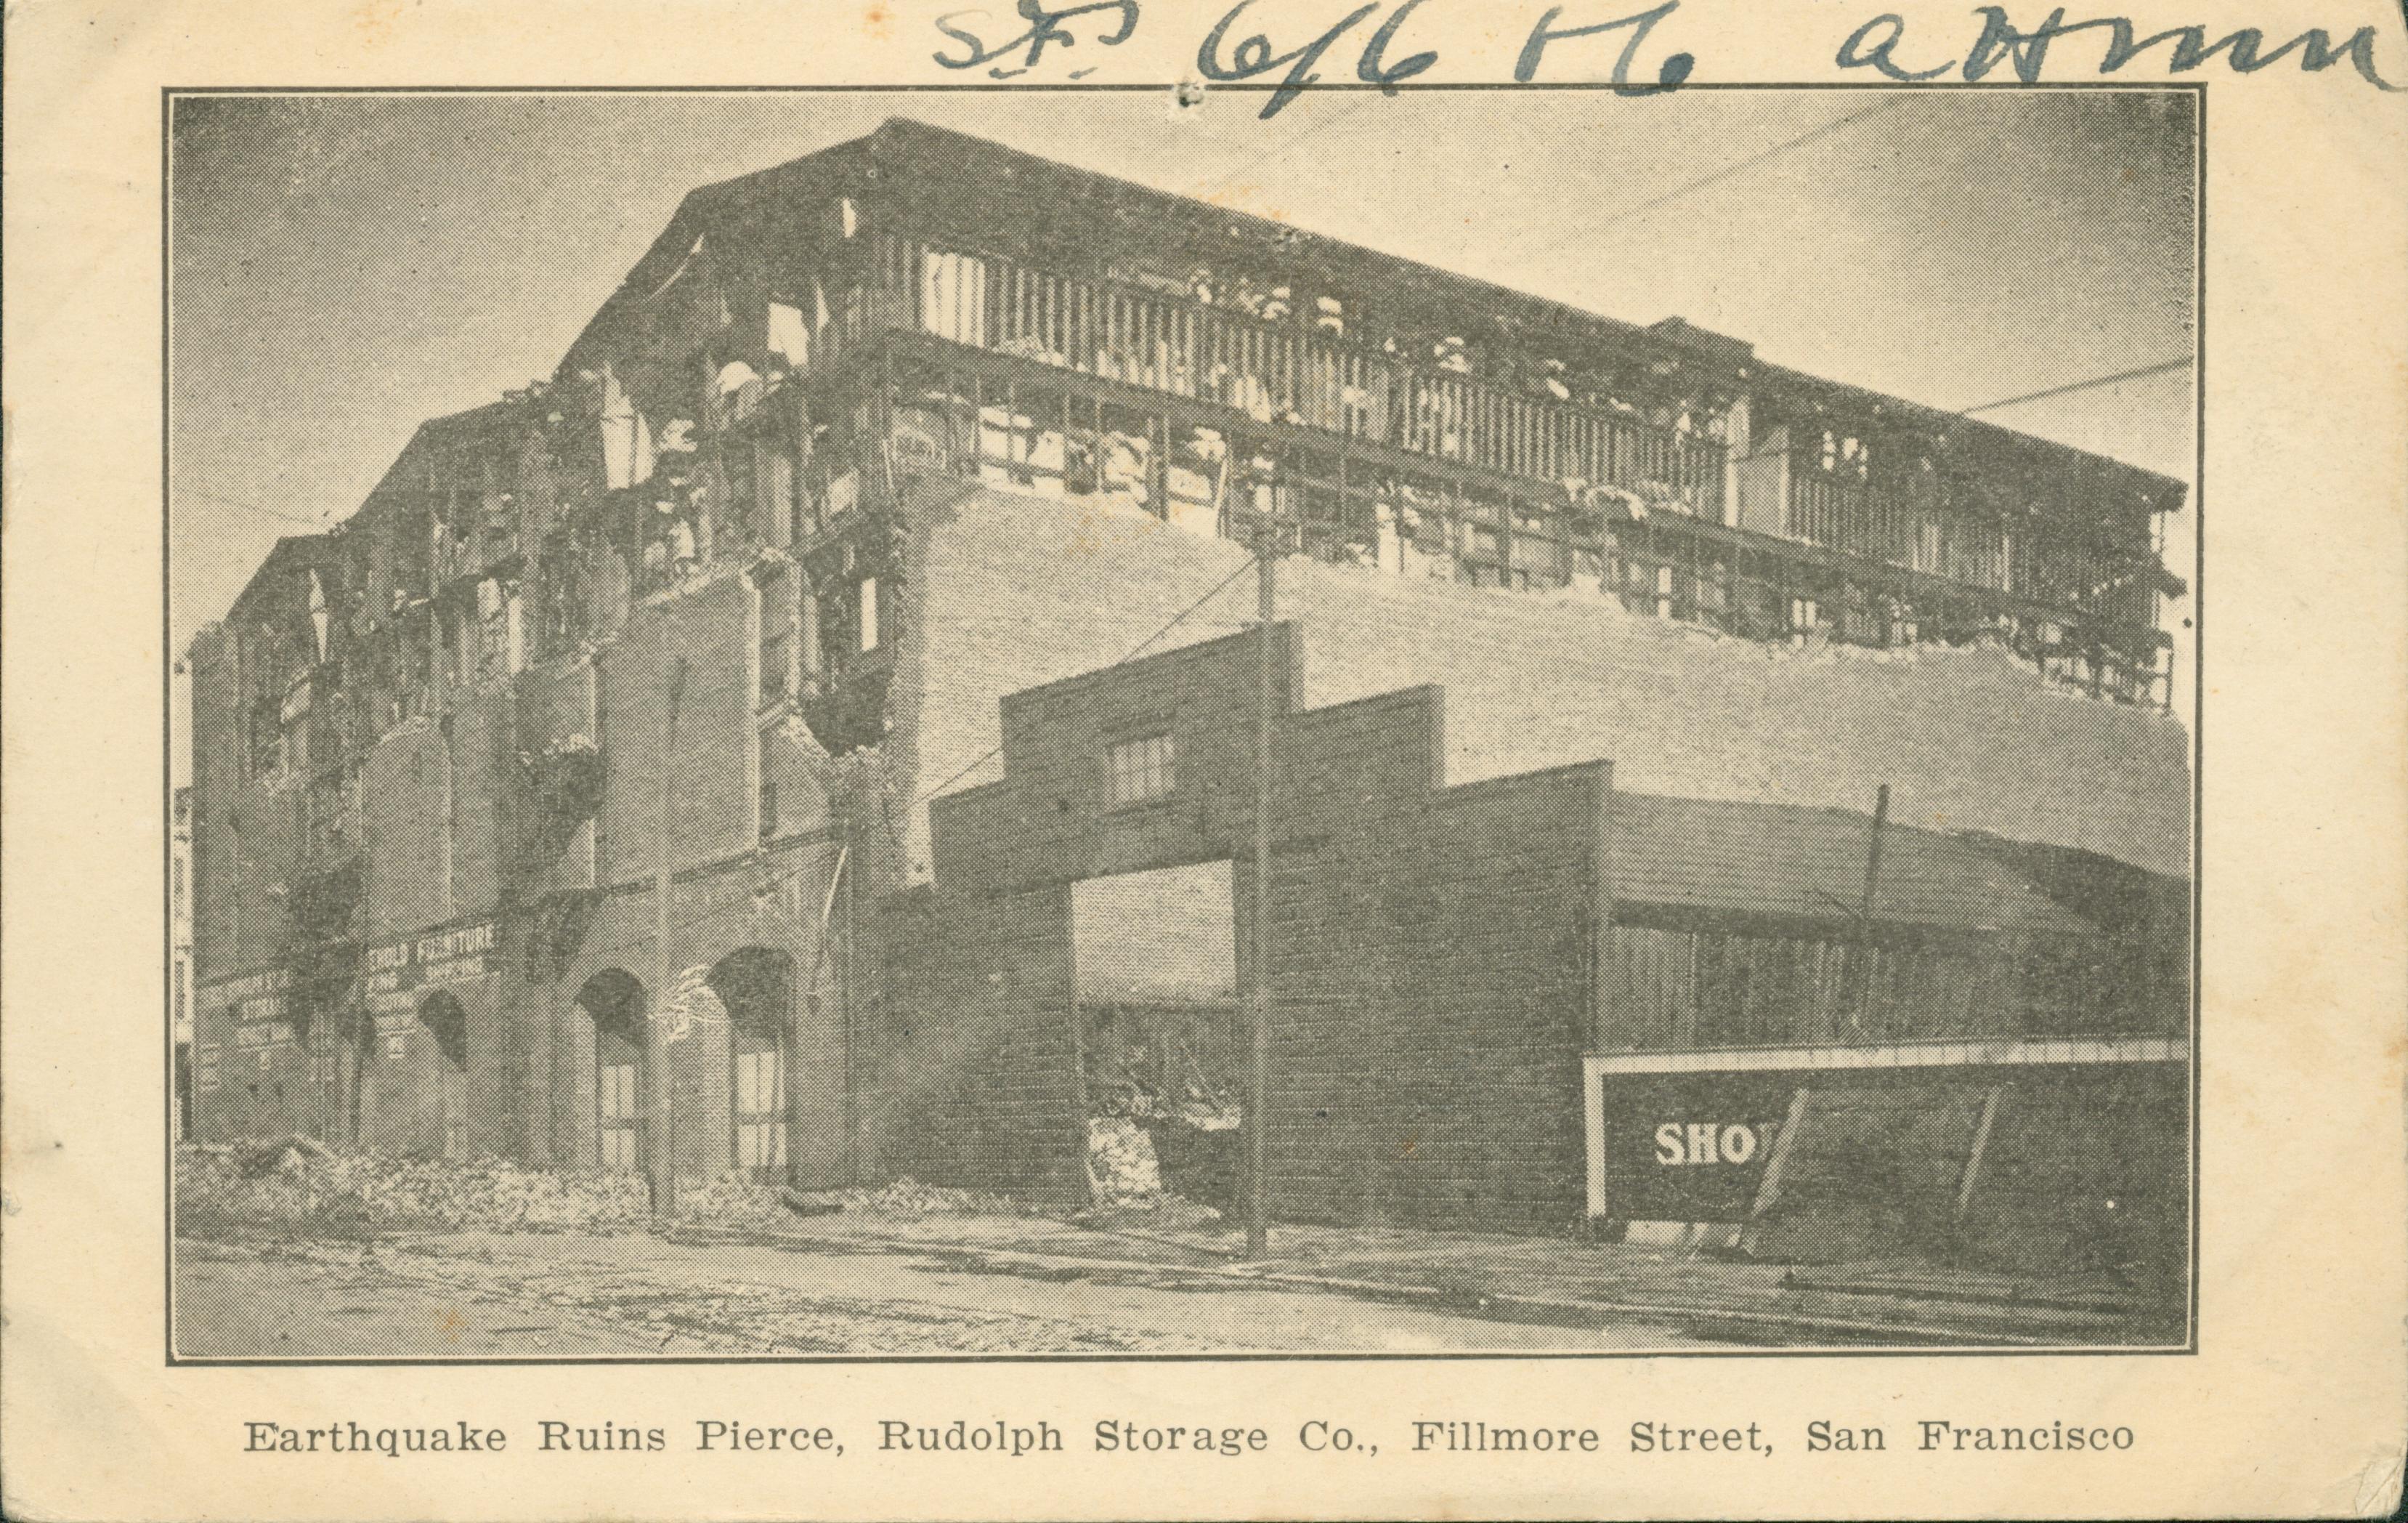 Photo showing the destruction to the Pierce, Rudolph Storage Company warehouse.